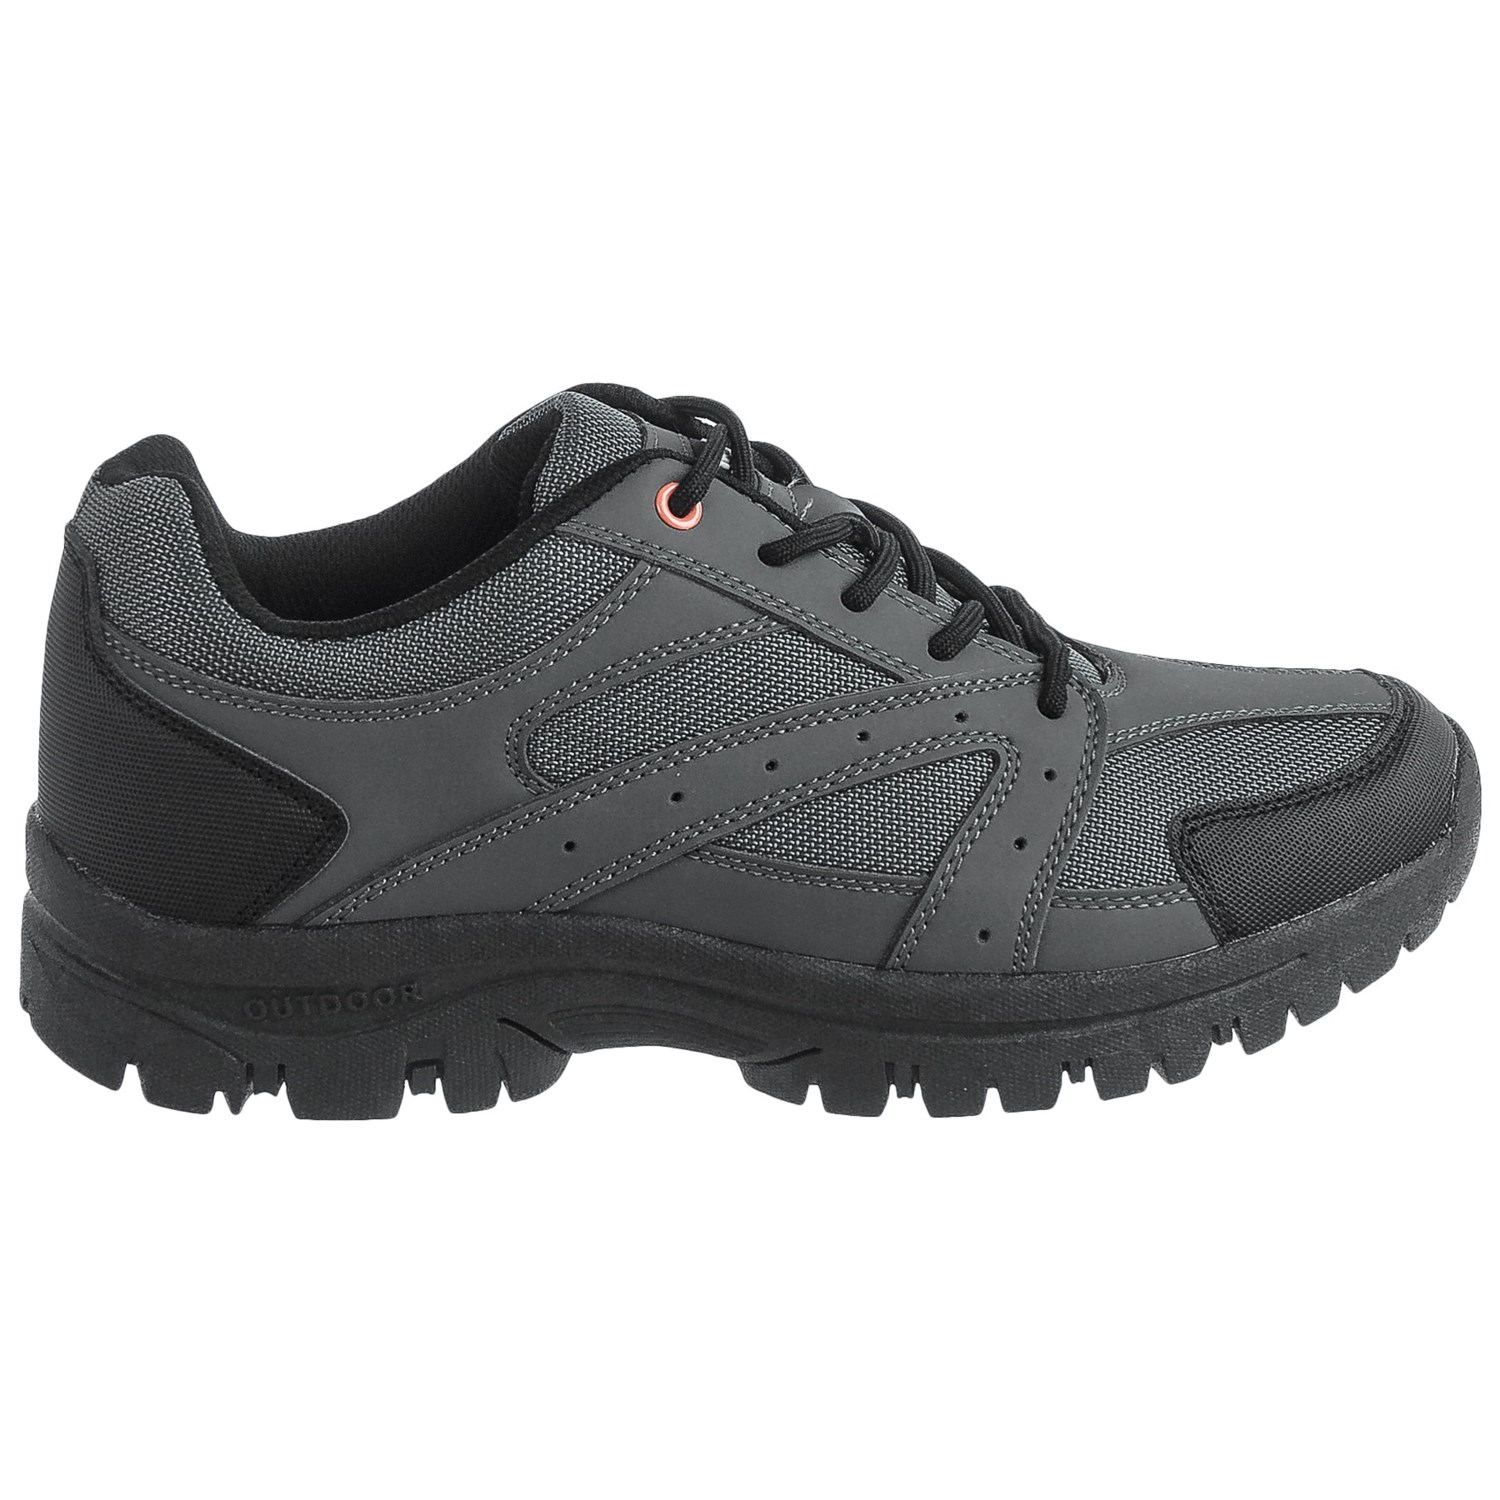 True North Taos Low Hiking Shoes (For Men) - Save 43%